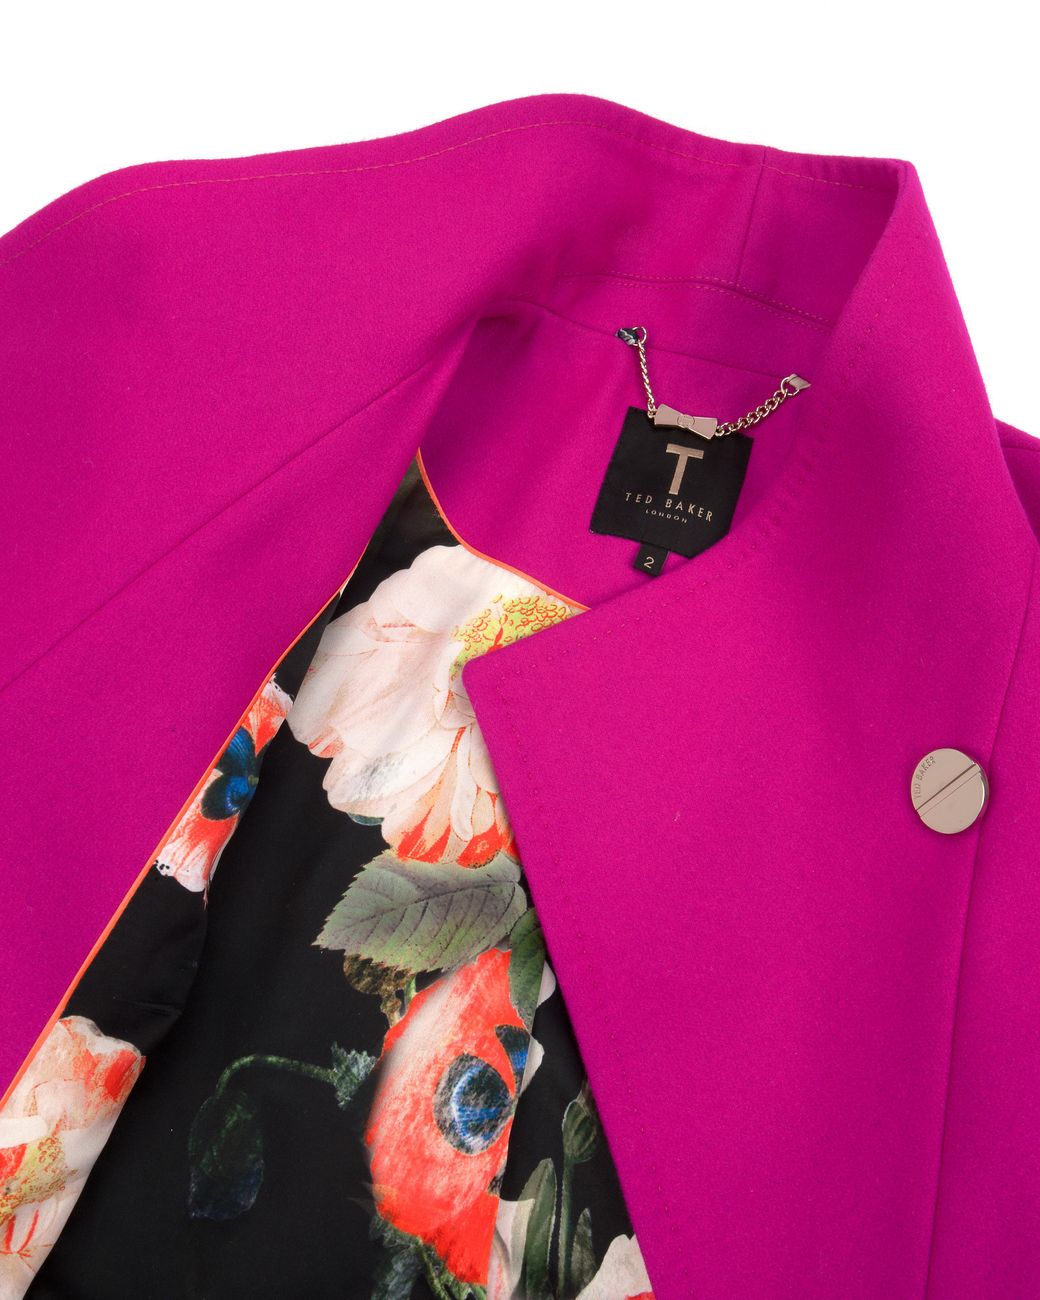 Ted Baker Belted Wrap Coat in Pink | Lyst